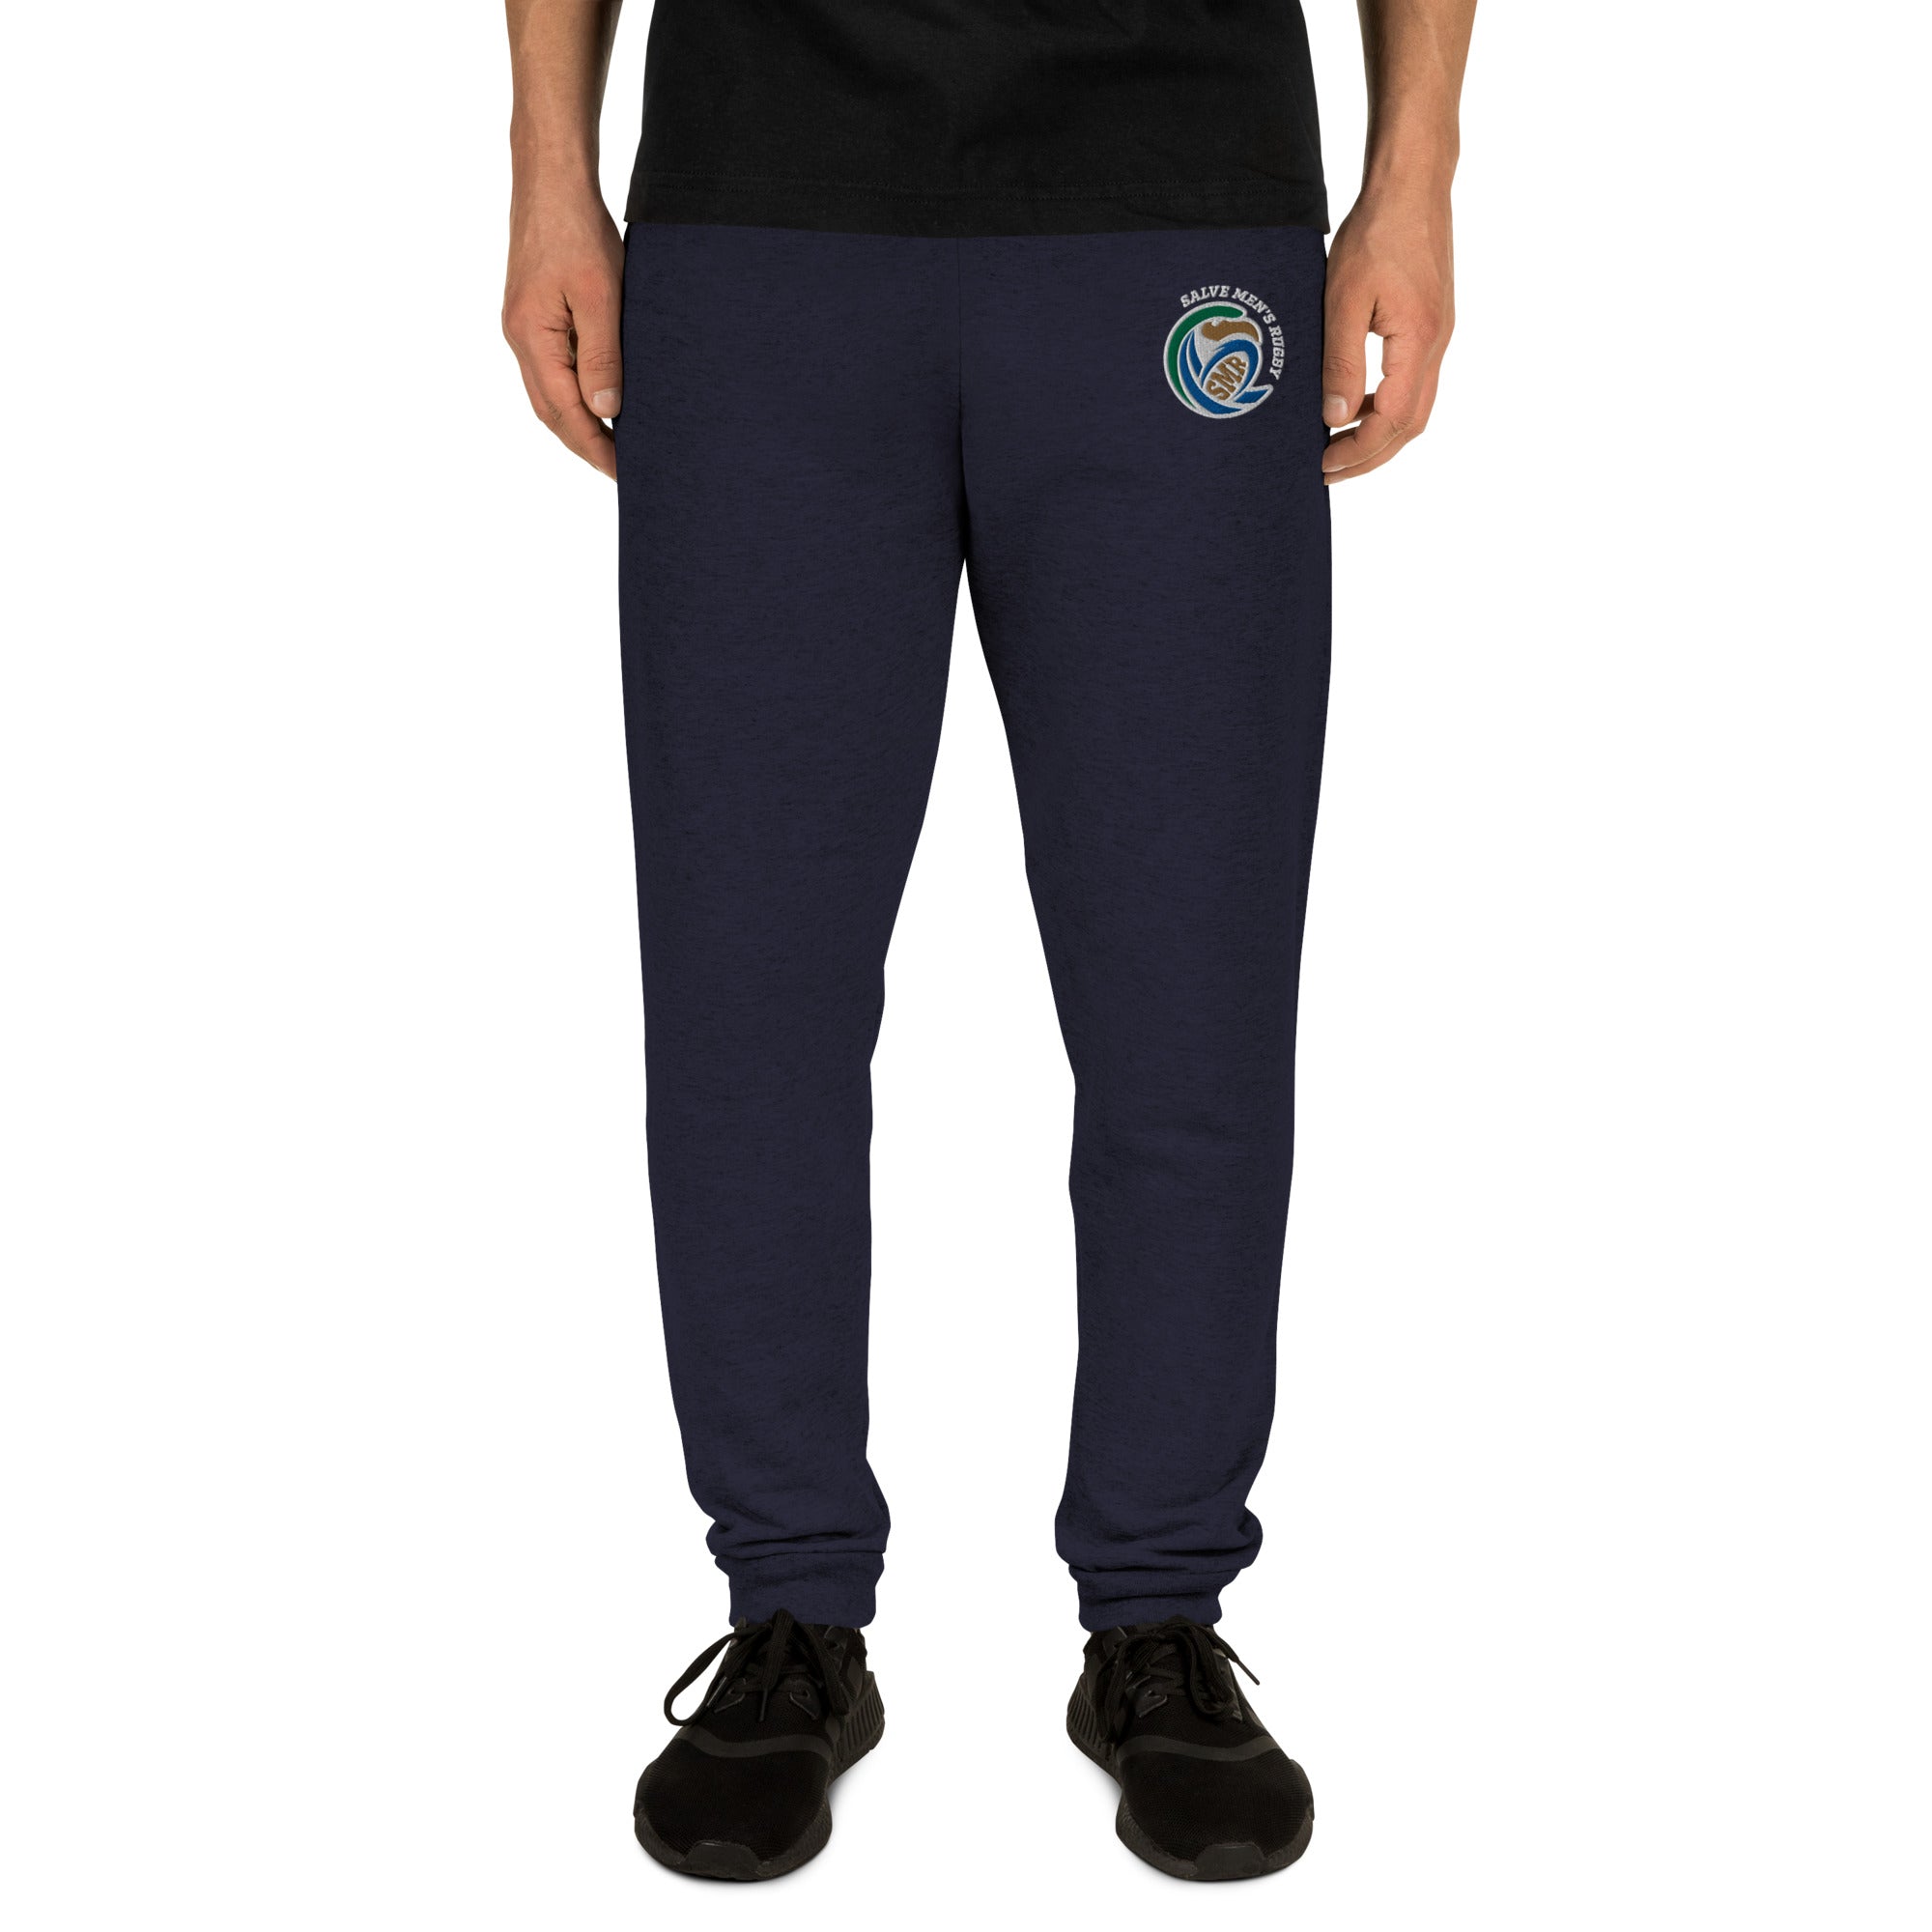 Rugby Imports Salve Men's Rugby Jogger Sweatpants